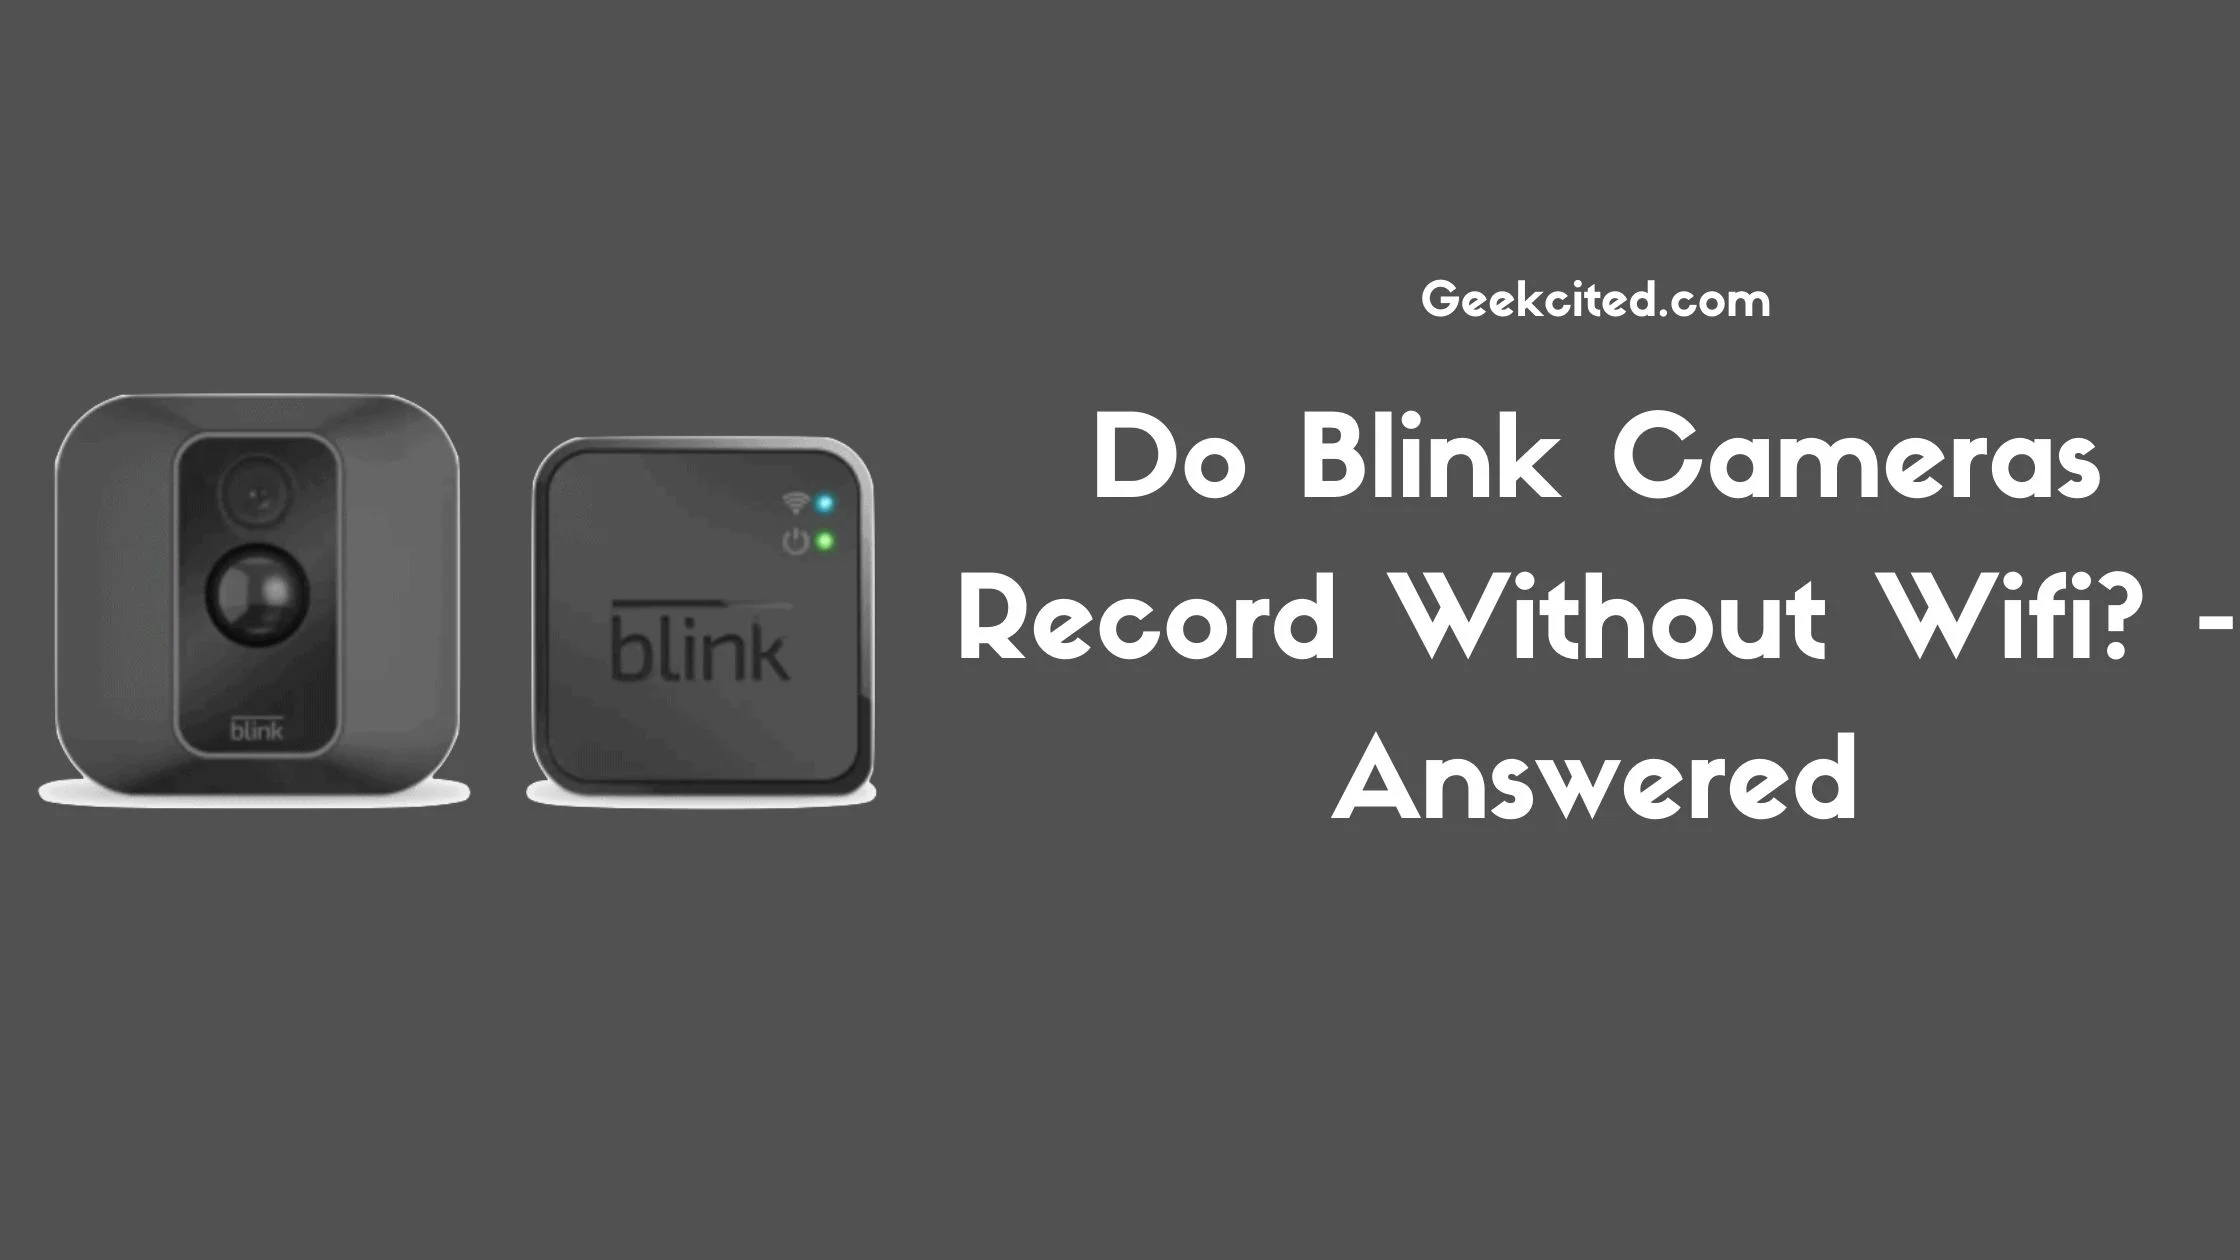 Do Blink Cameras Record Without Wifi